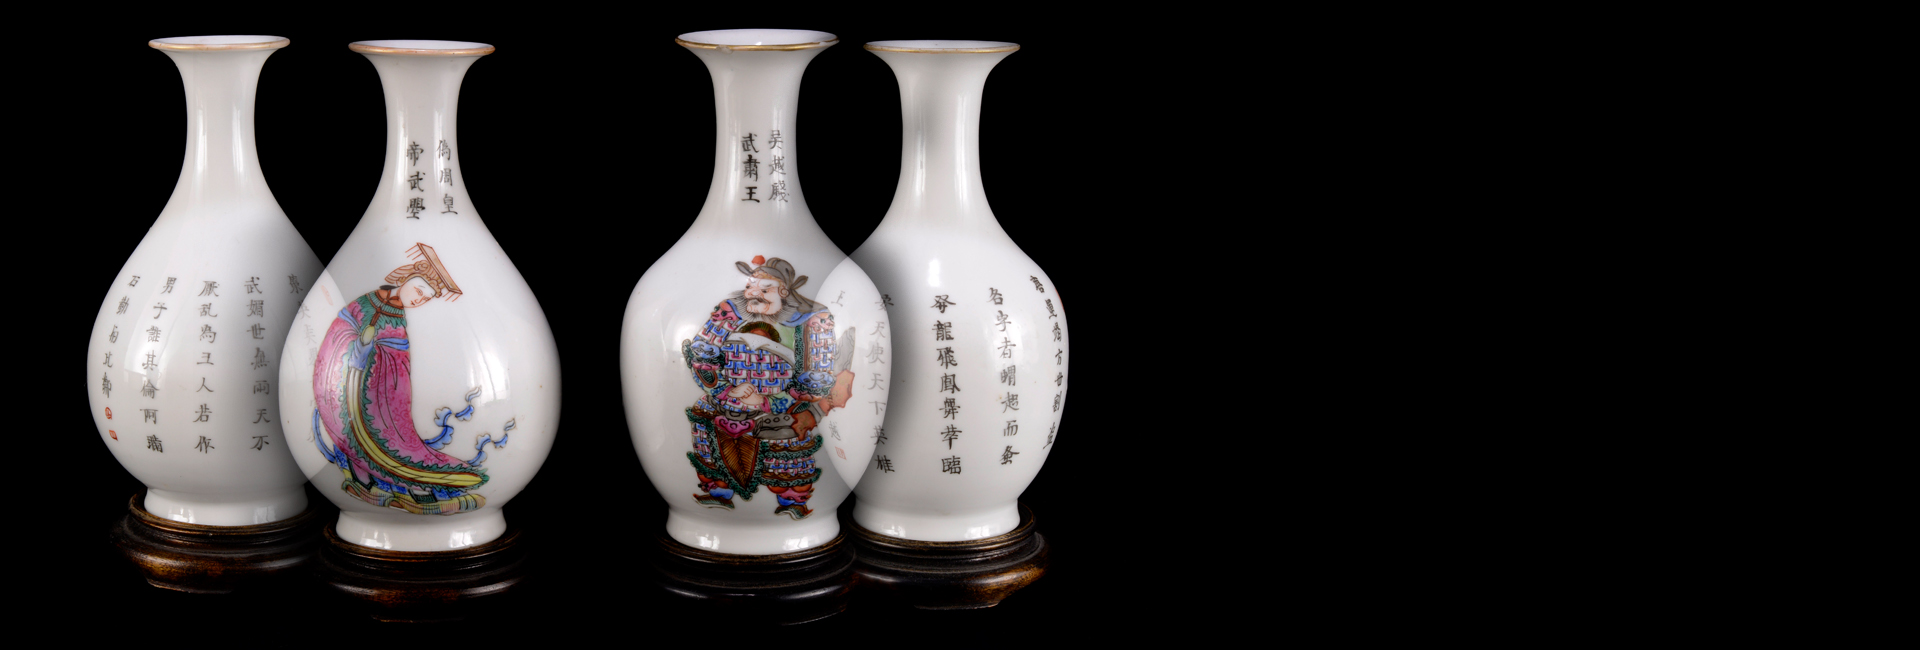 China, Republic of China period (1920-1930) [A PAIR OF VASES]